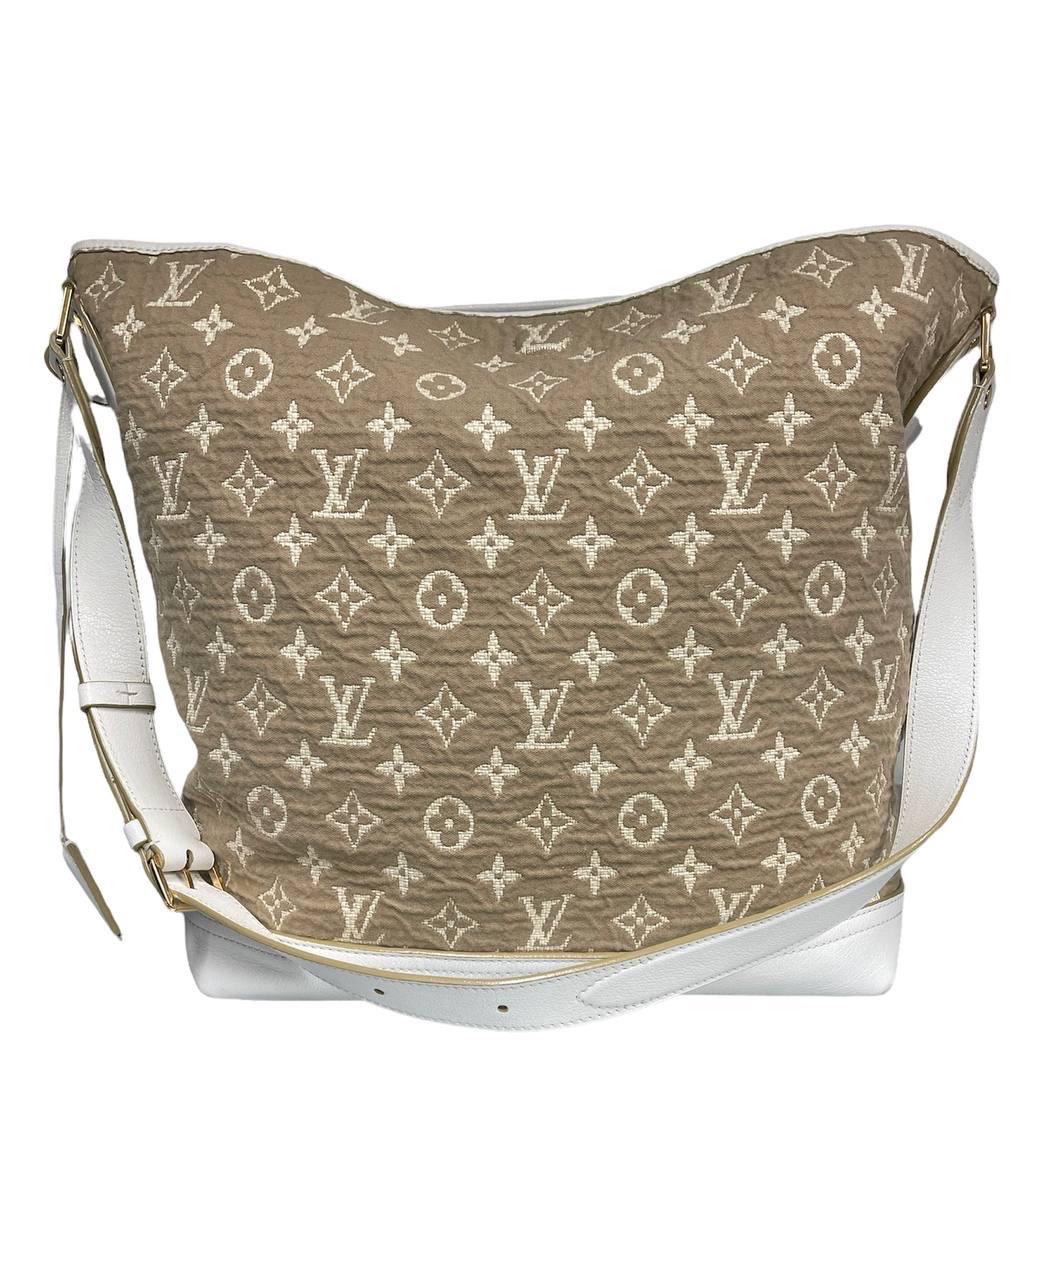 Louis Vuitton Besace Shoulder Bag Beige White In Good Condition For Sale In Torre Del Greco, IT